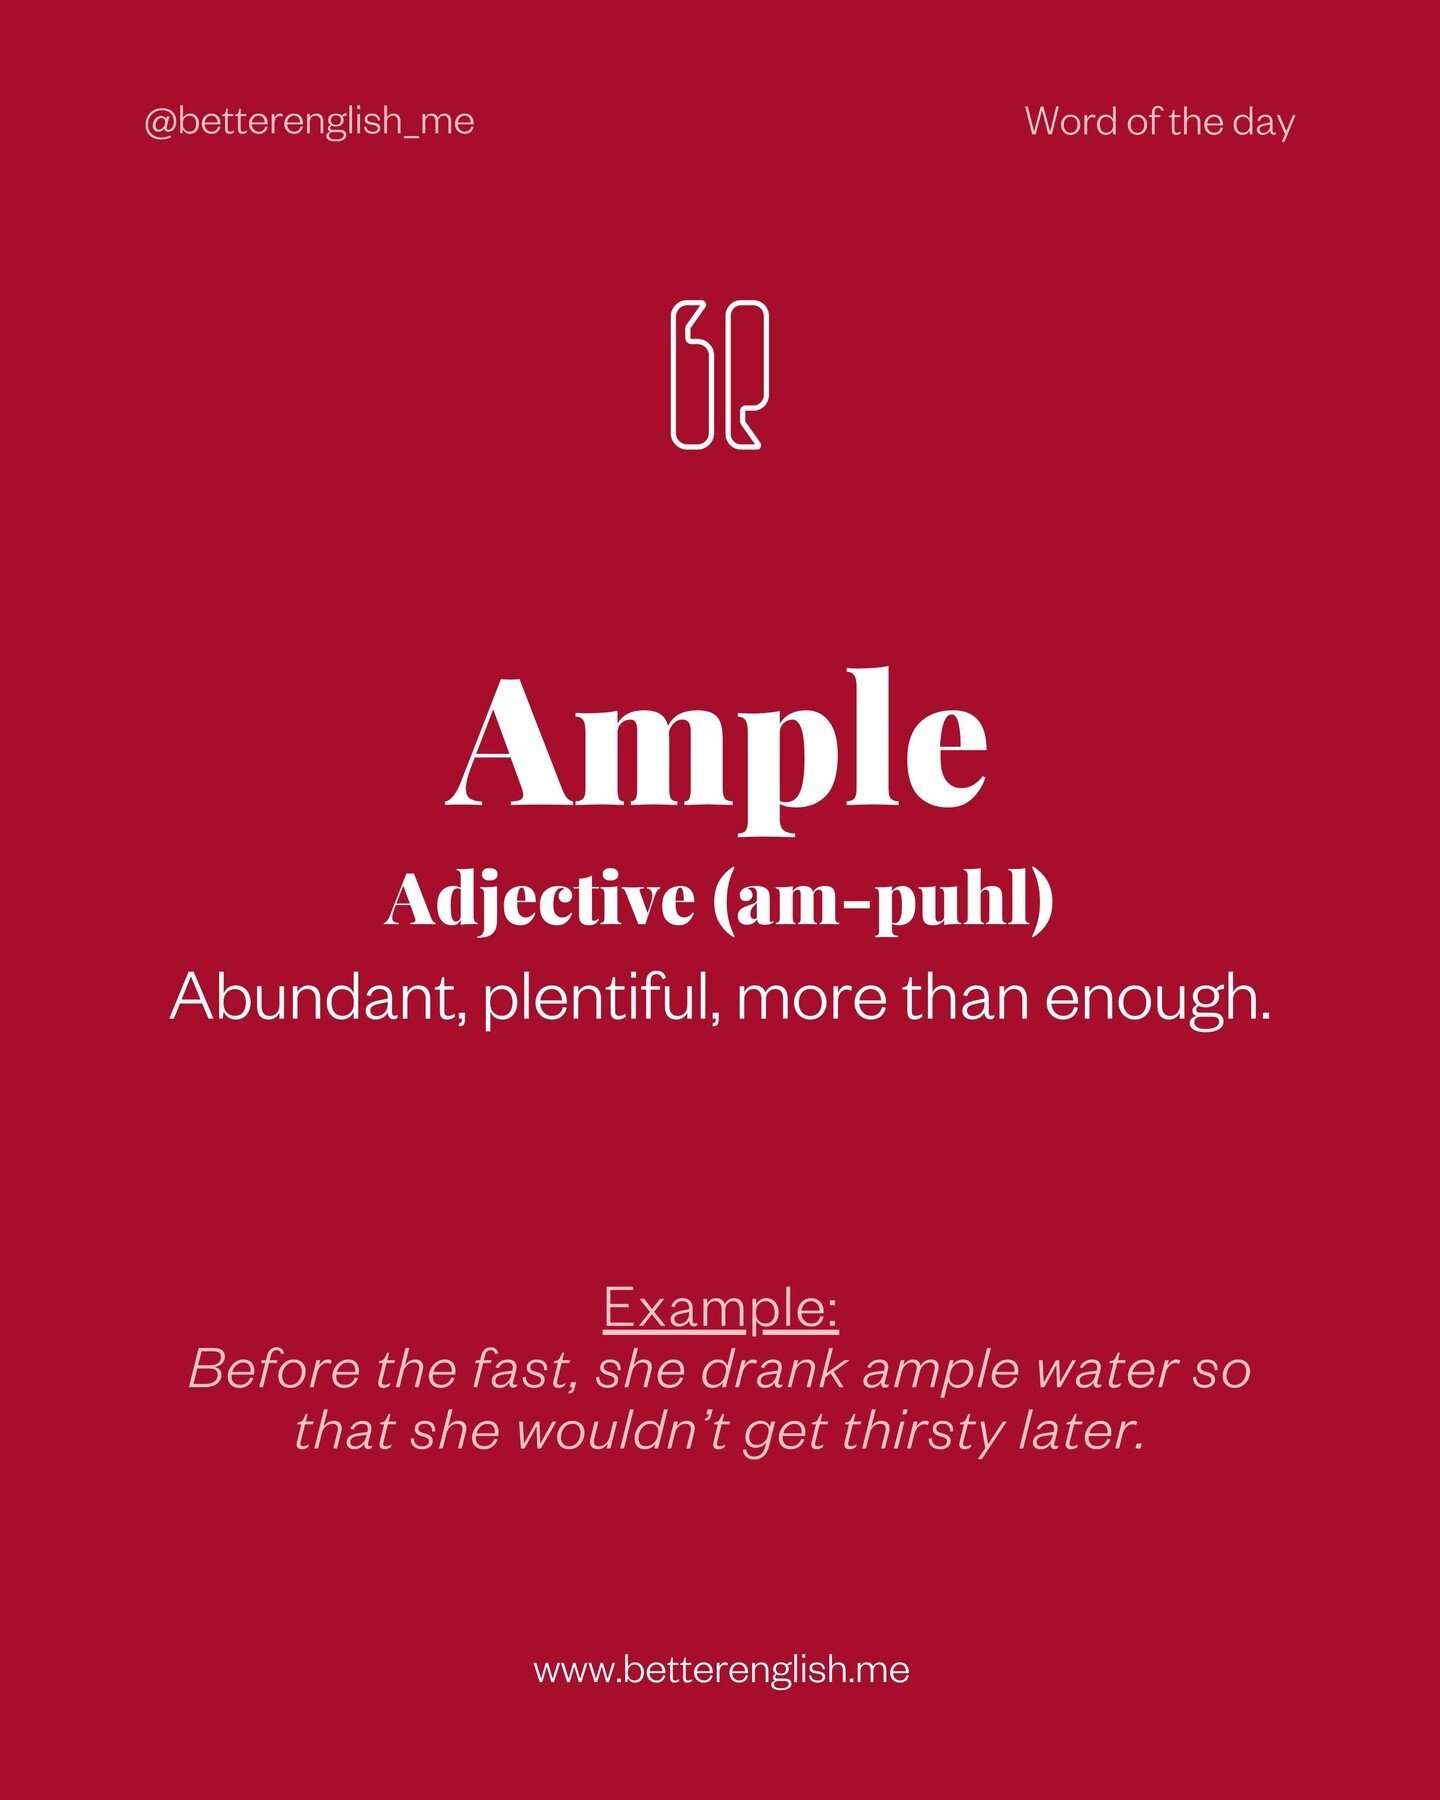 🌟 Discover our #WordOfTheDay: &quot;Ample&quot; - Plenty to go around! 

Example: &quot;The community generously donated food, ensuring ample supplies for those in need.&quot; 🍛

Learned something new? Give us a ❤️ and share a sentence using 'ample